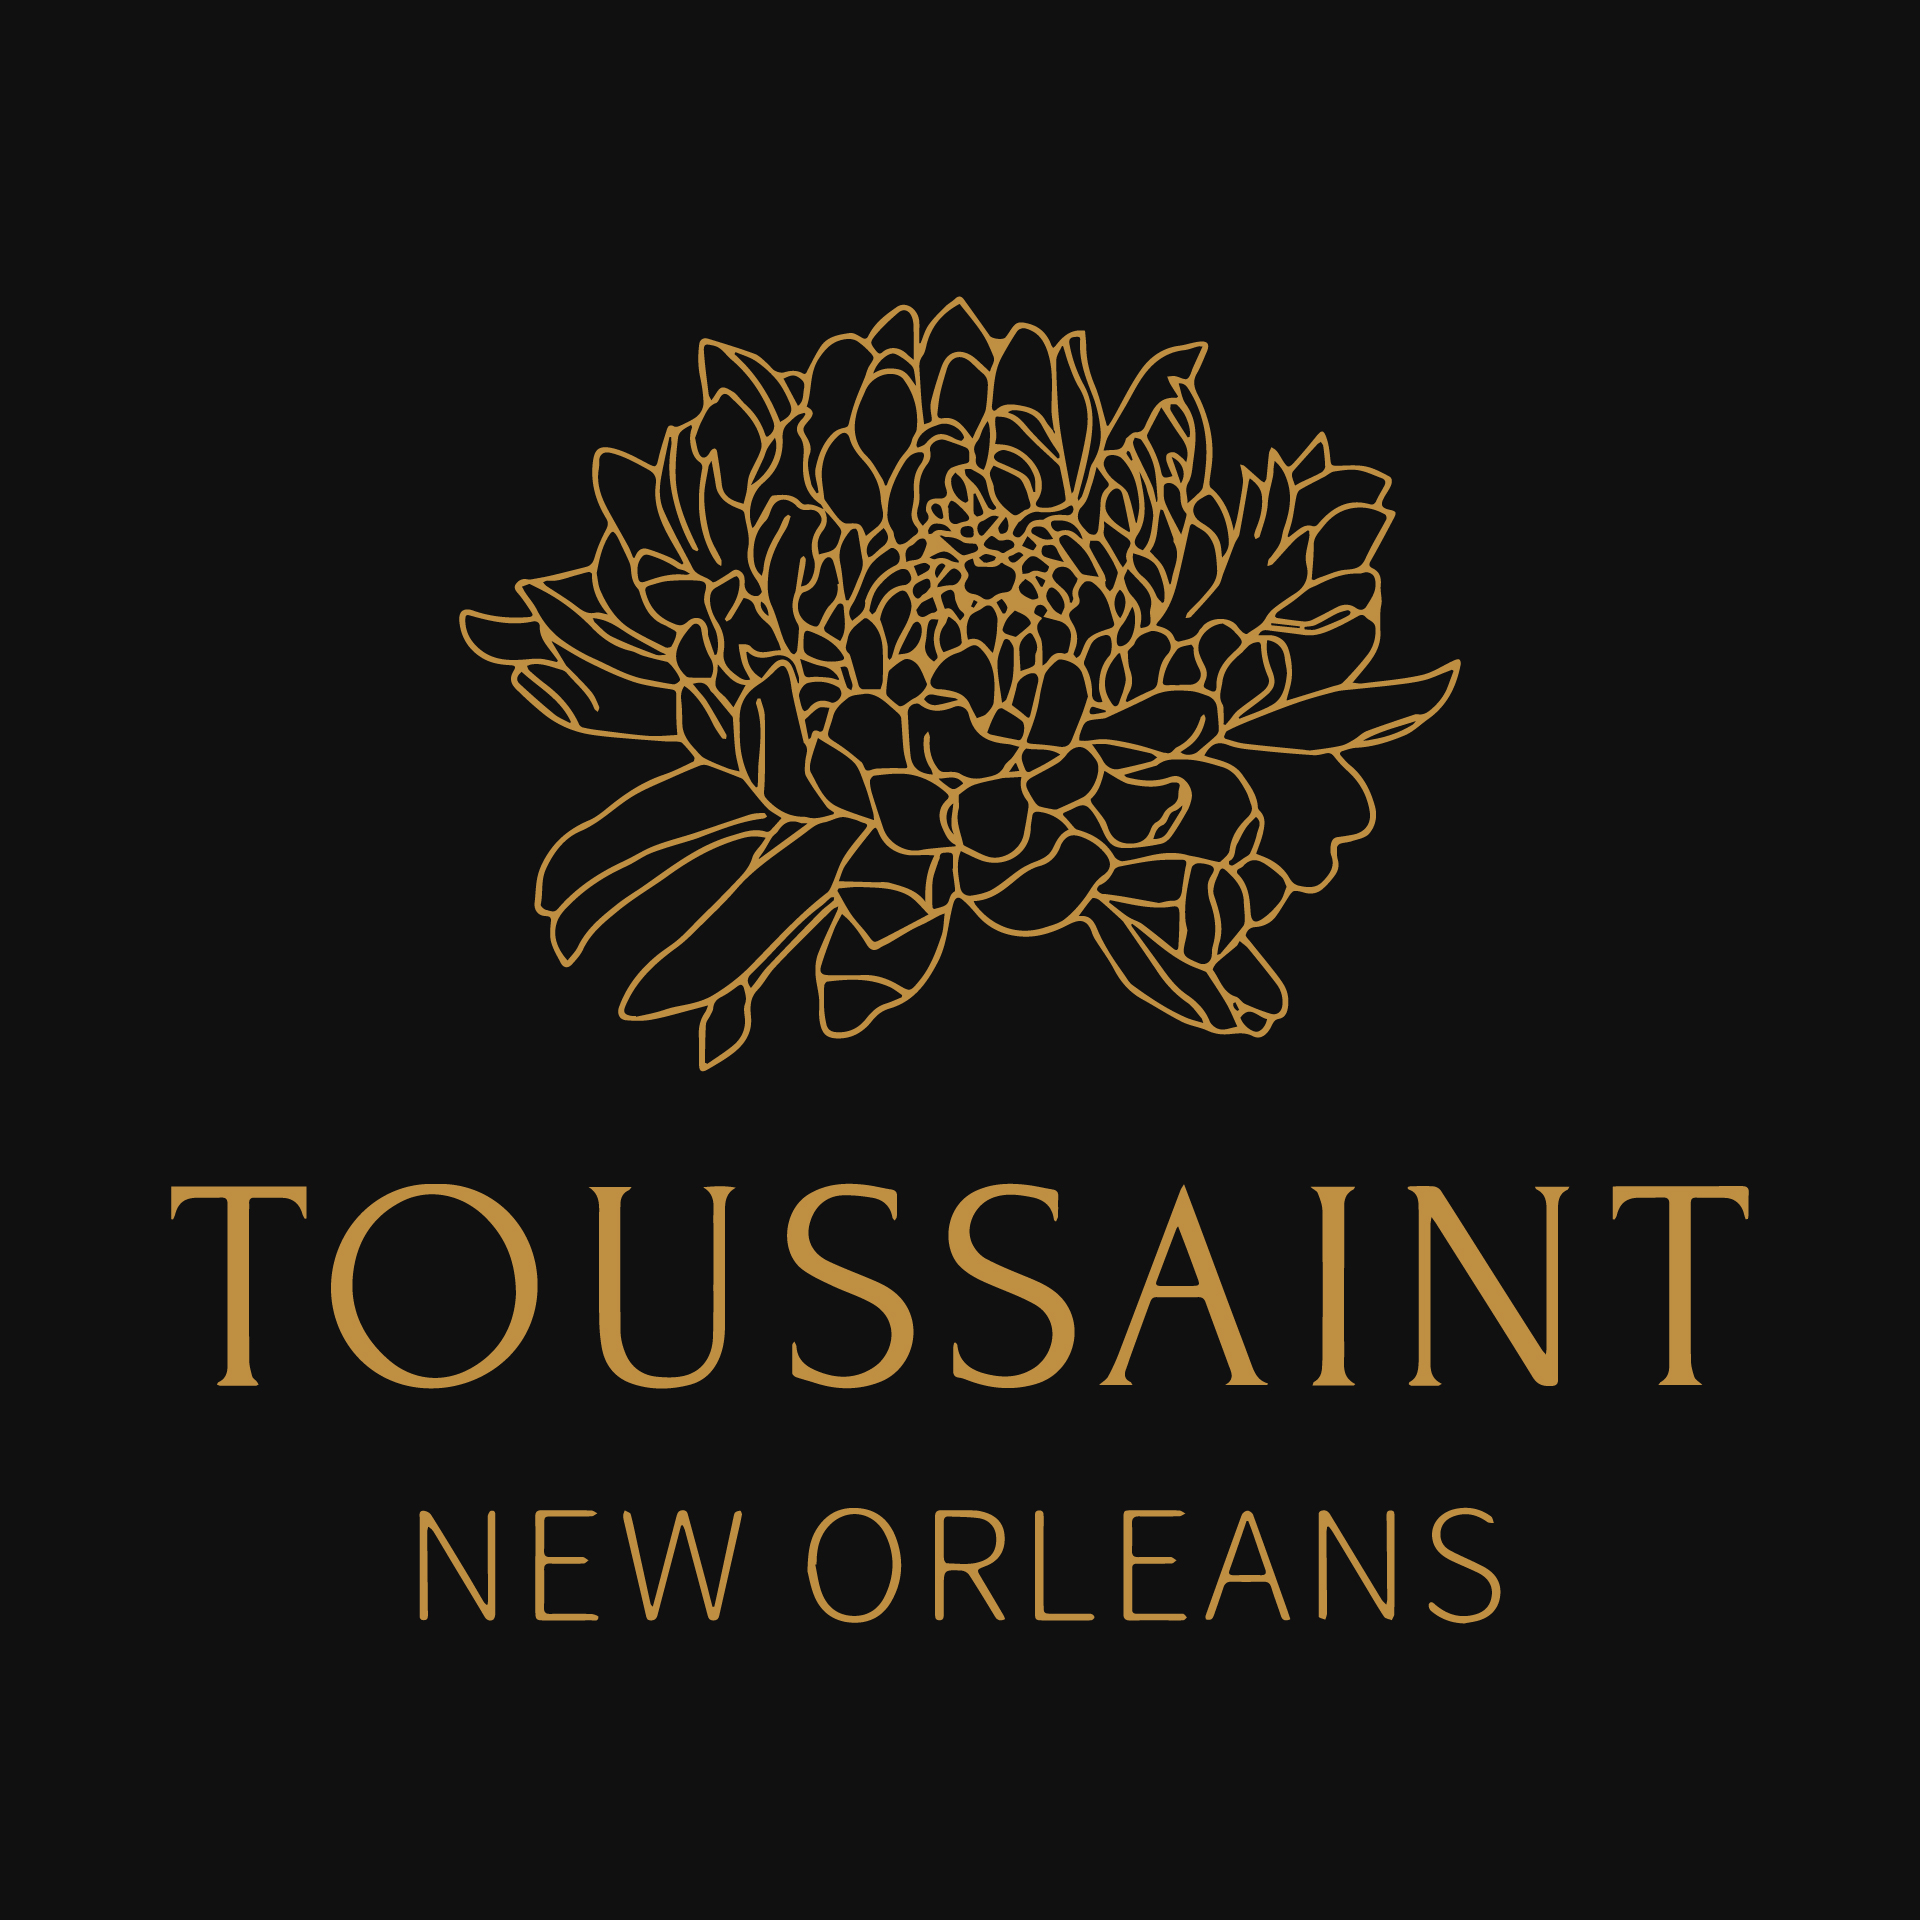 Toussaint pop-up at Miel Brewery